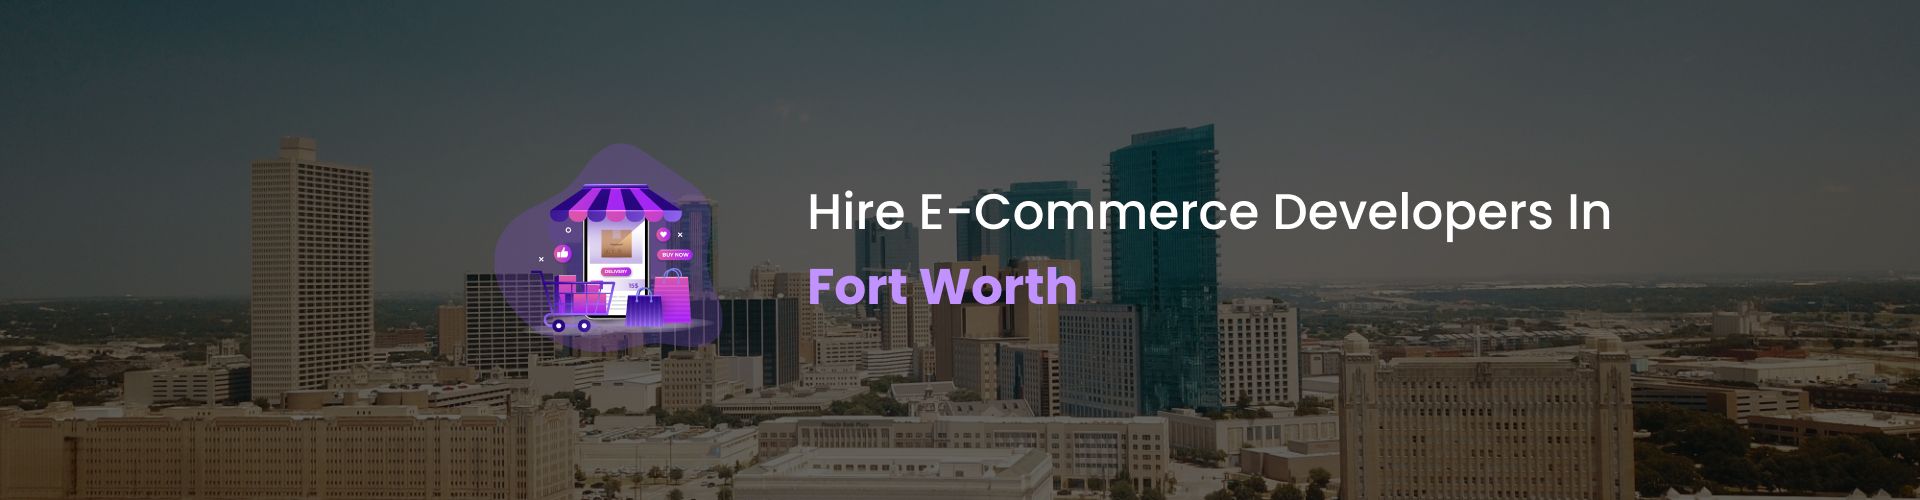 ecommerce developers in fort worth